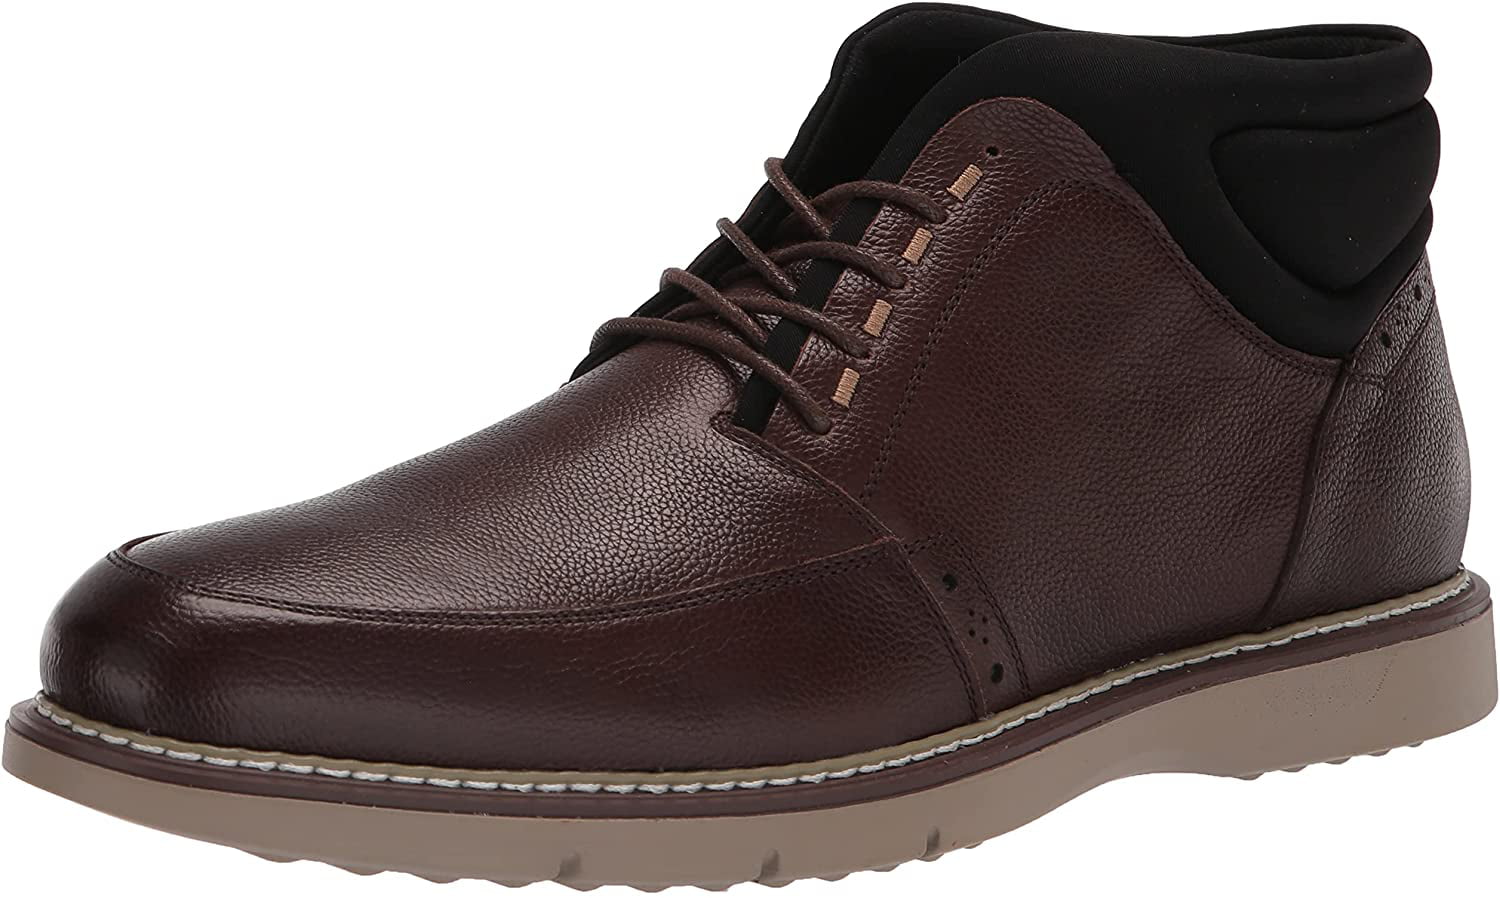 Buy STACY ADAMS Mens Slade Chukka Boot 9 Brown Tumbled Online at Lowest ...